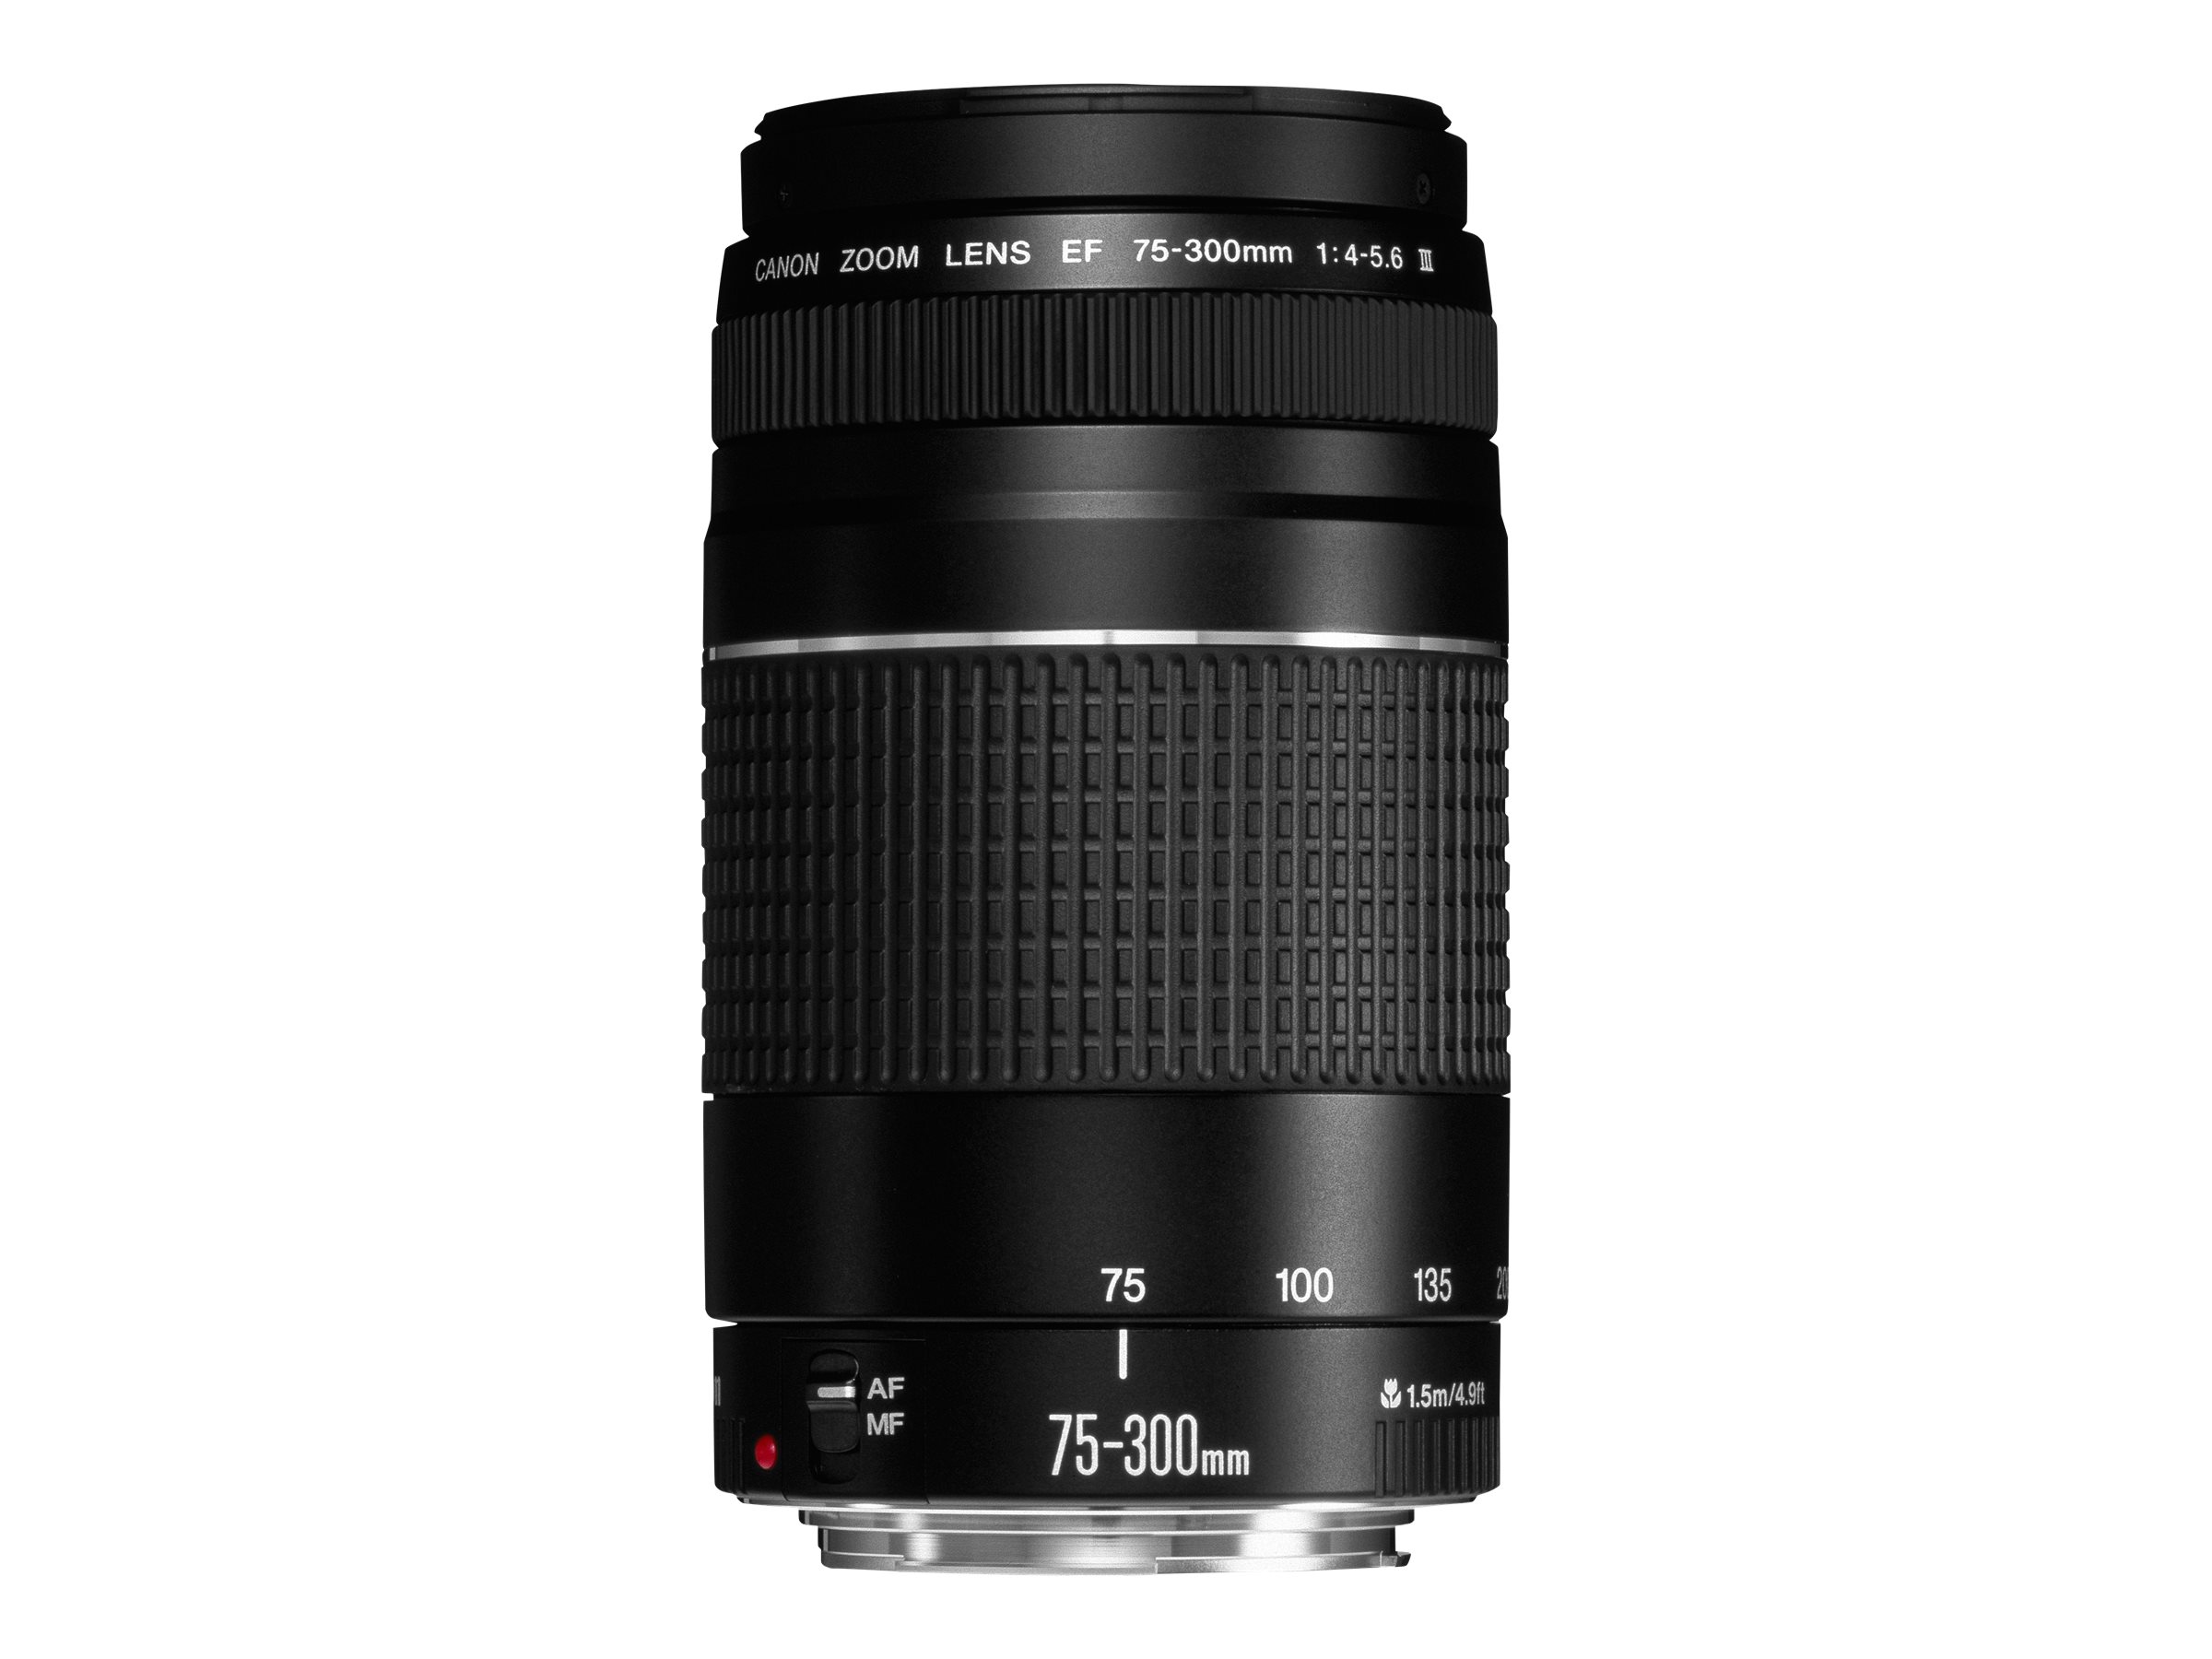 Canon EF 75-300mm f/4.0-5.6 III Lens - 6473A003